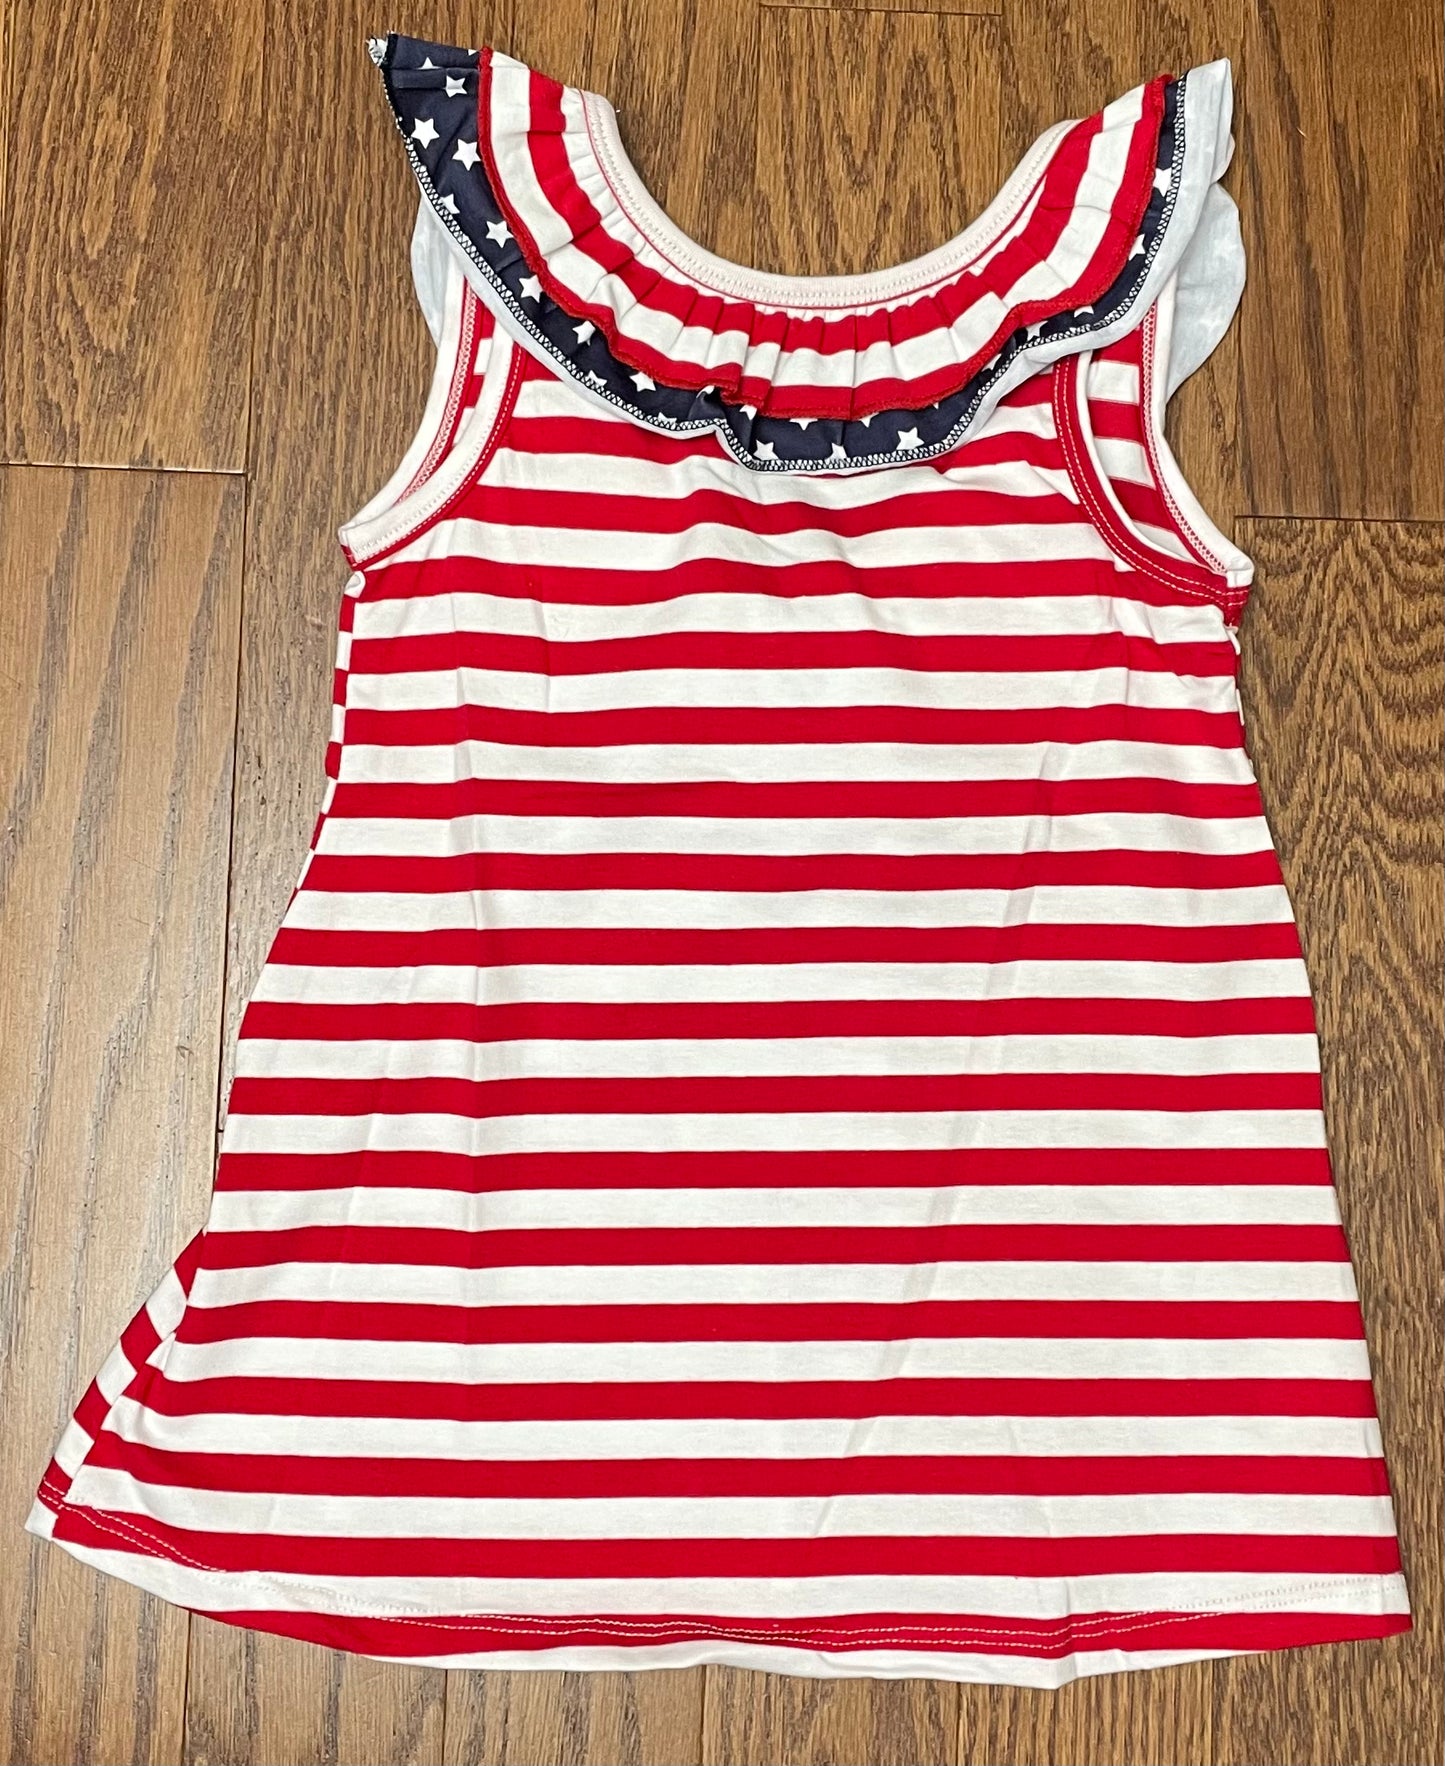 Red, White, and Blue Dress